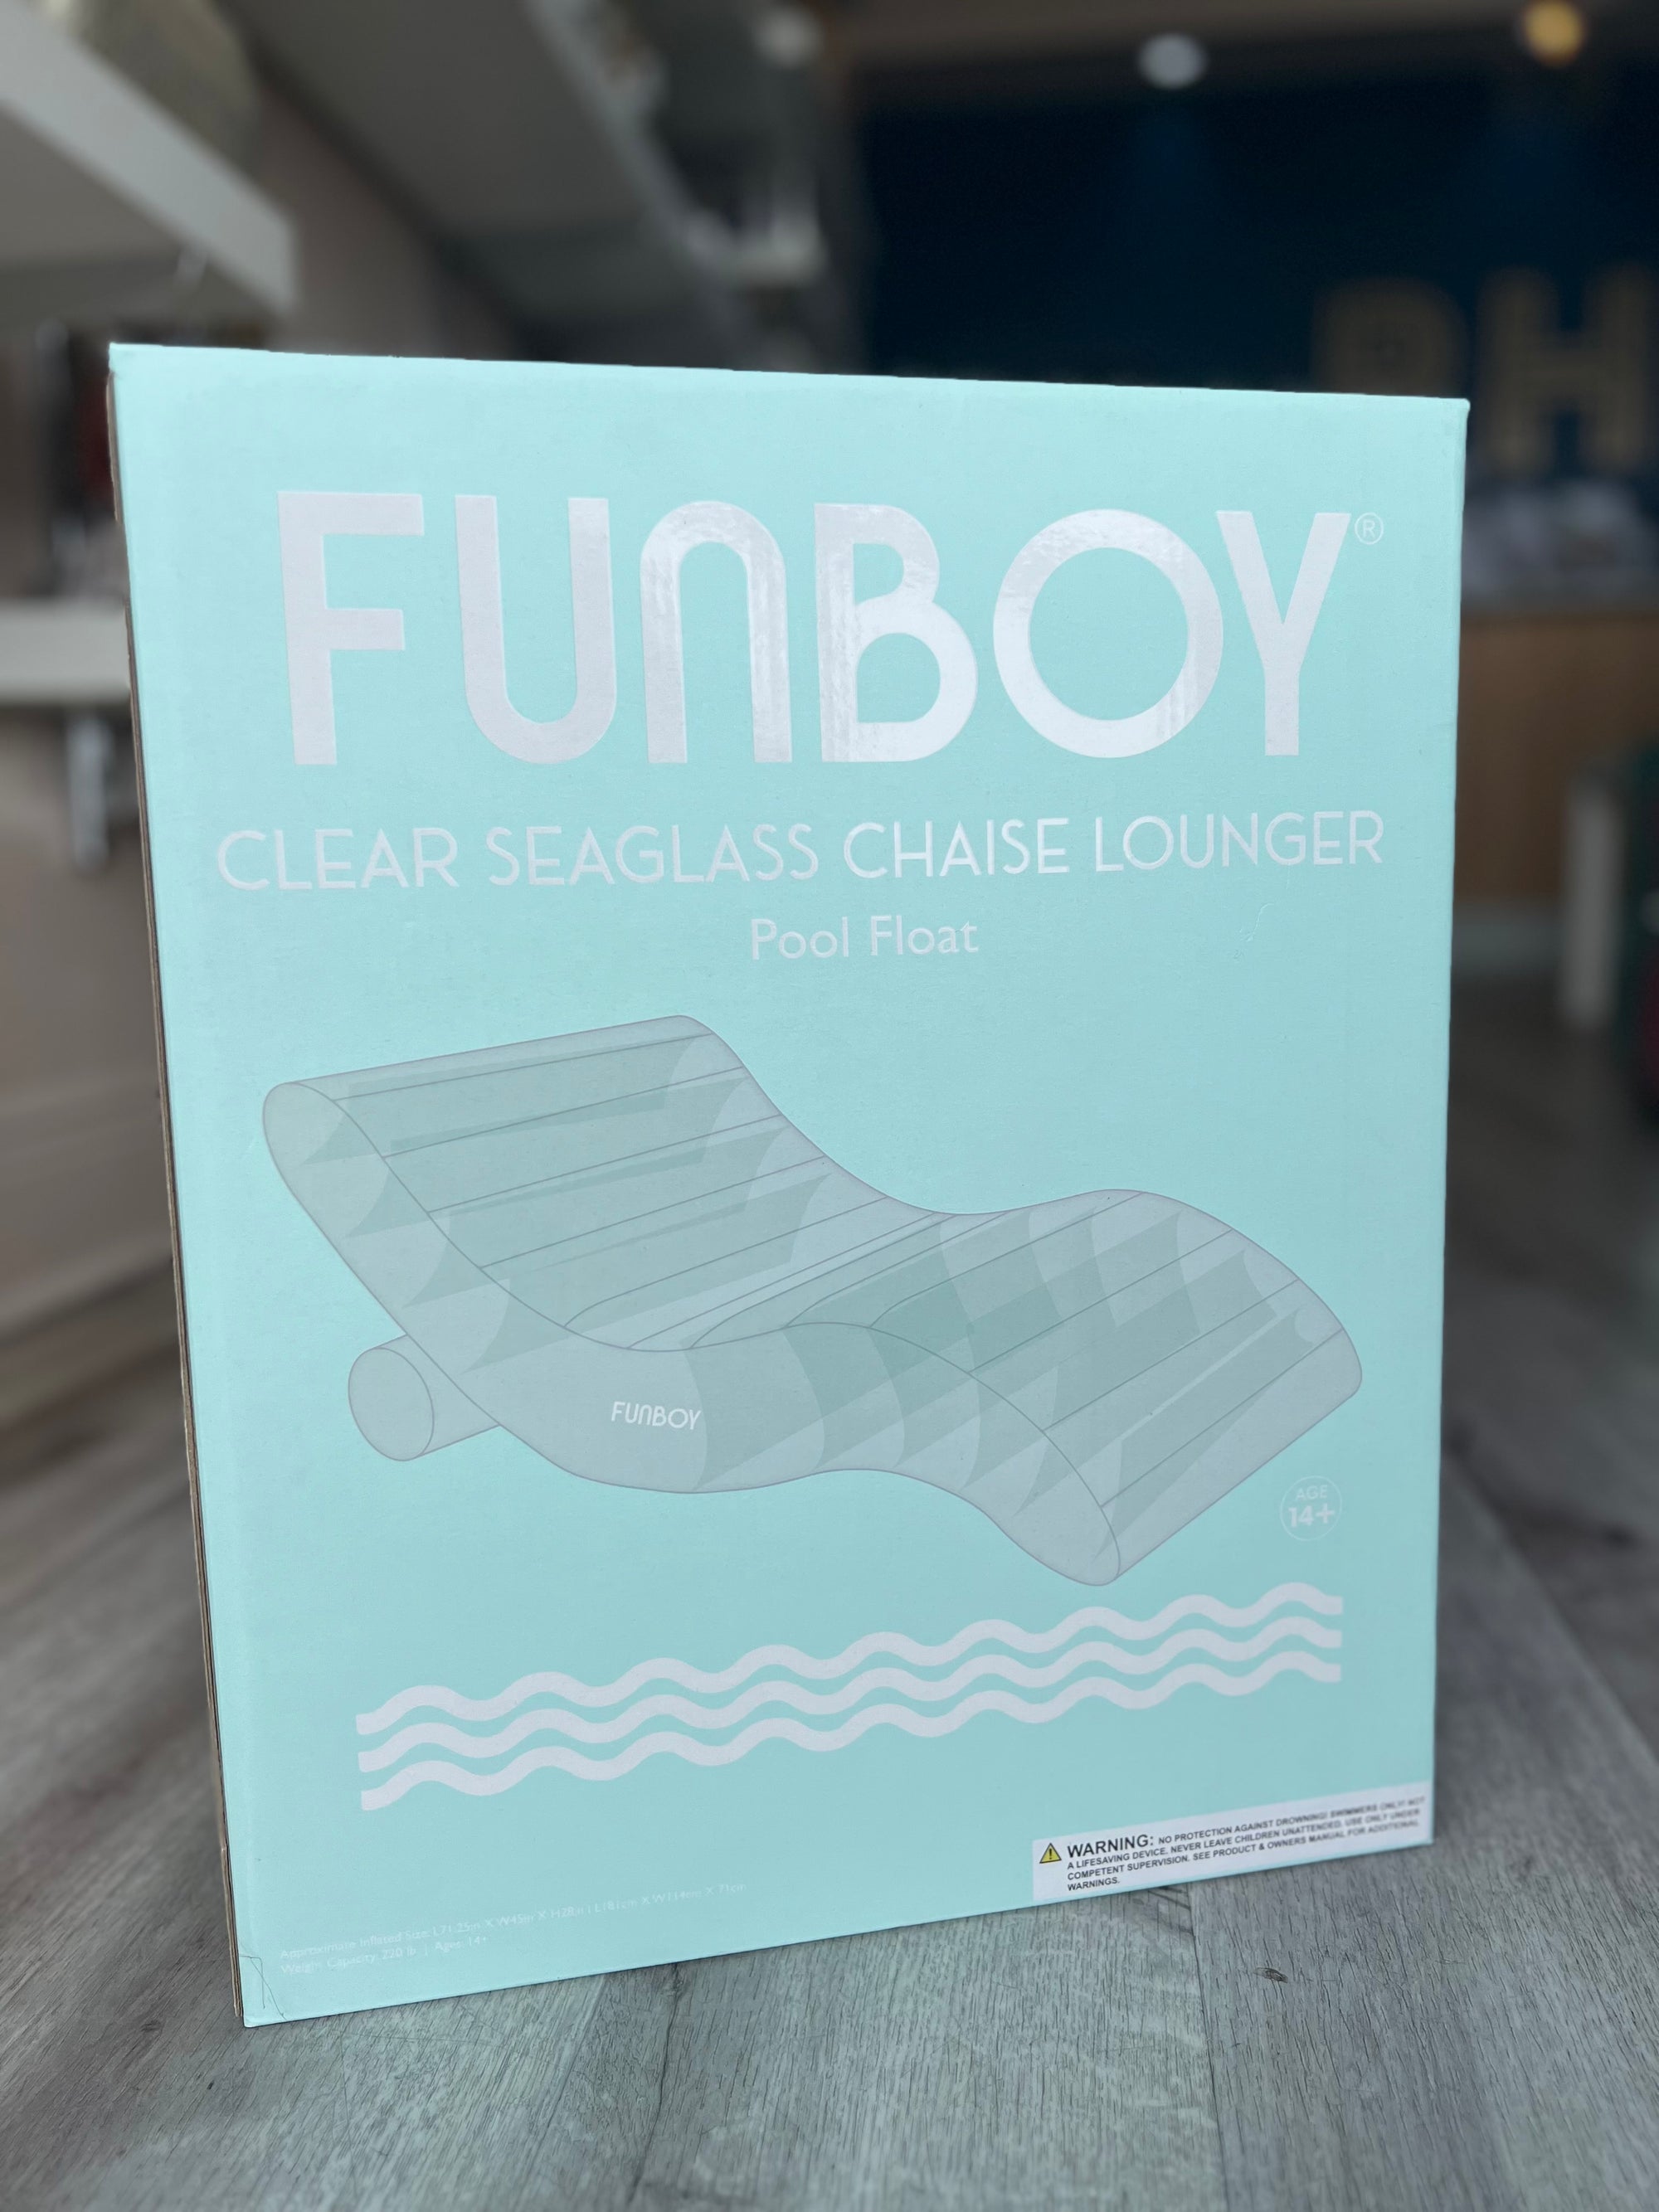 Clear Seaglass Chaise Lounger